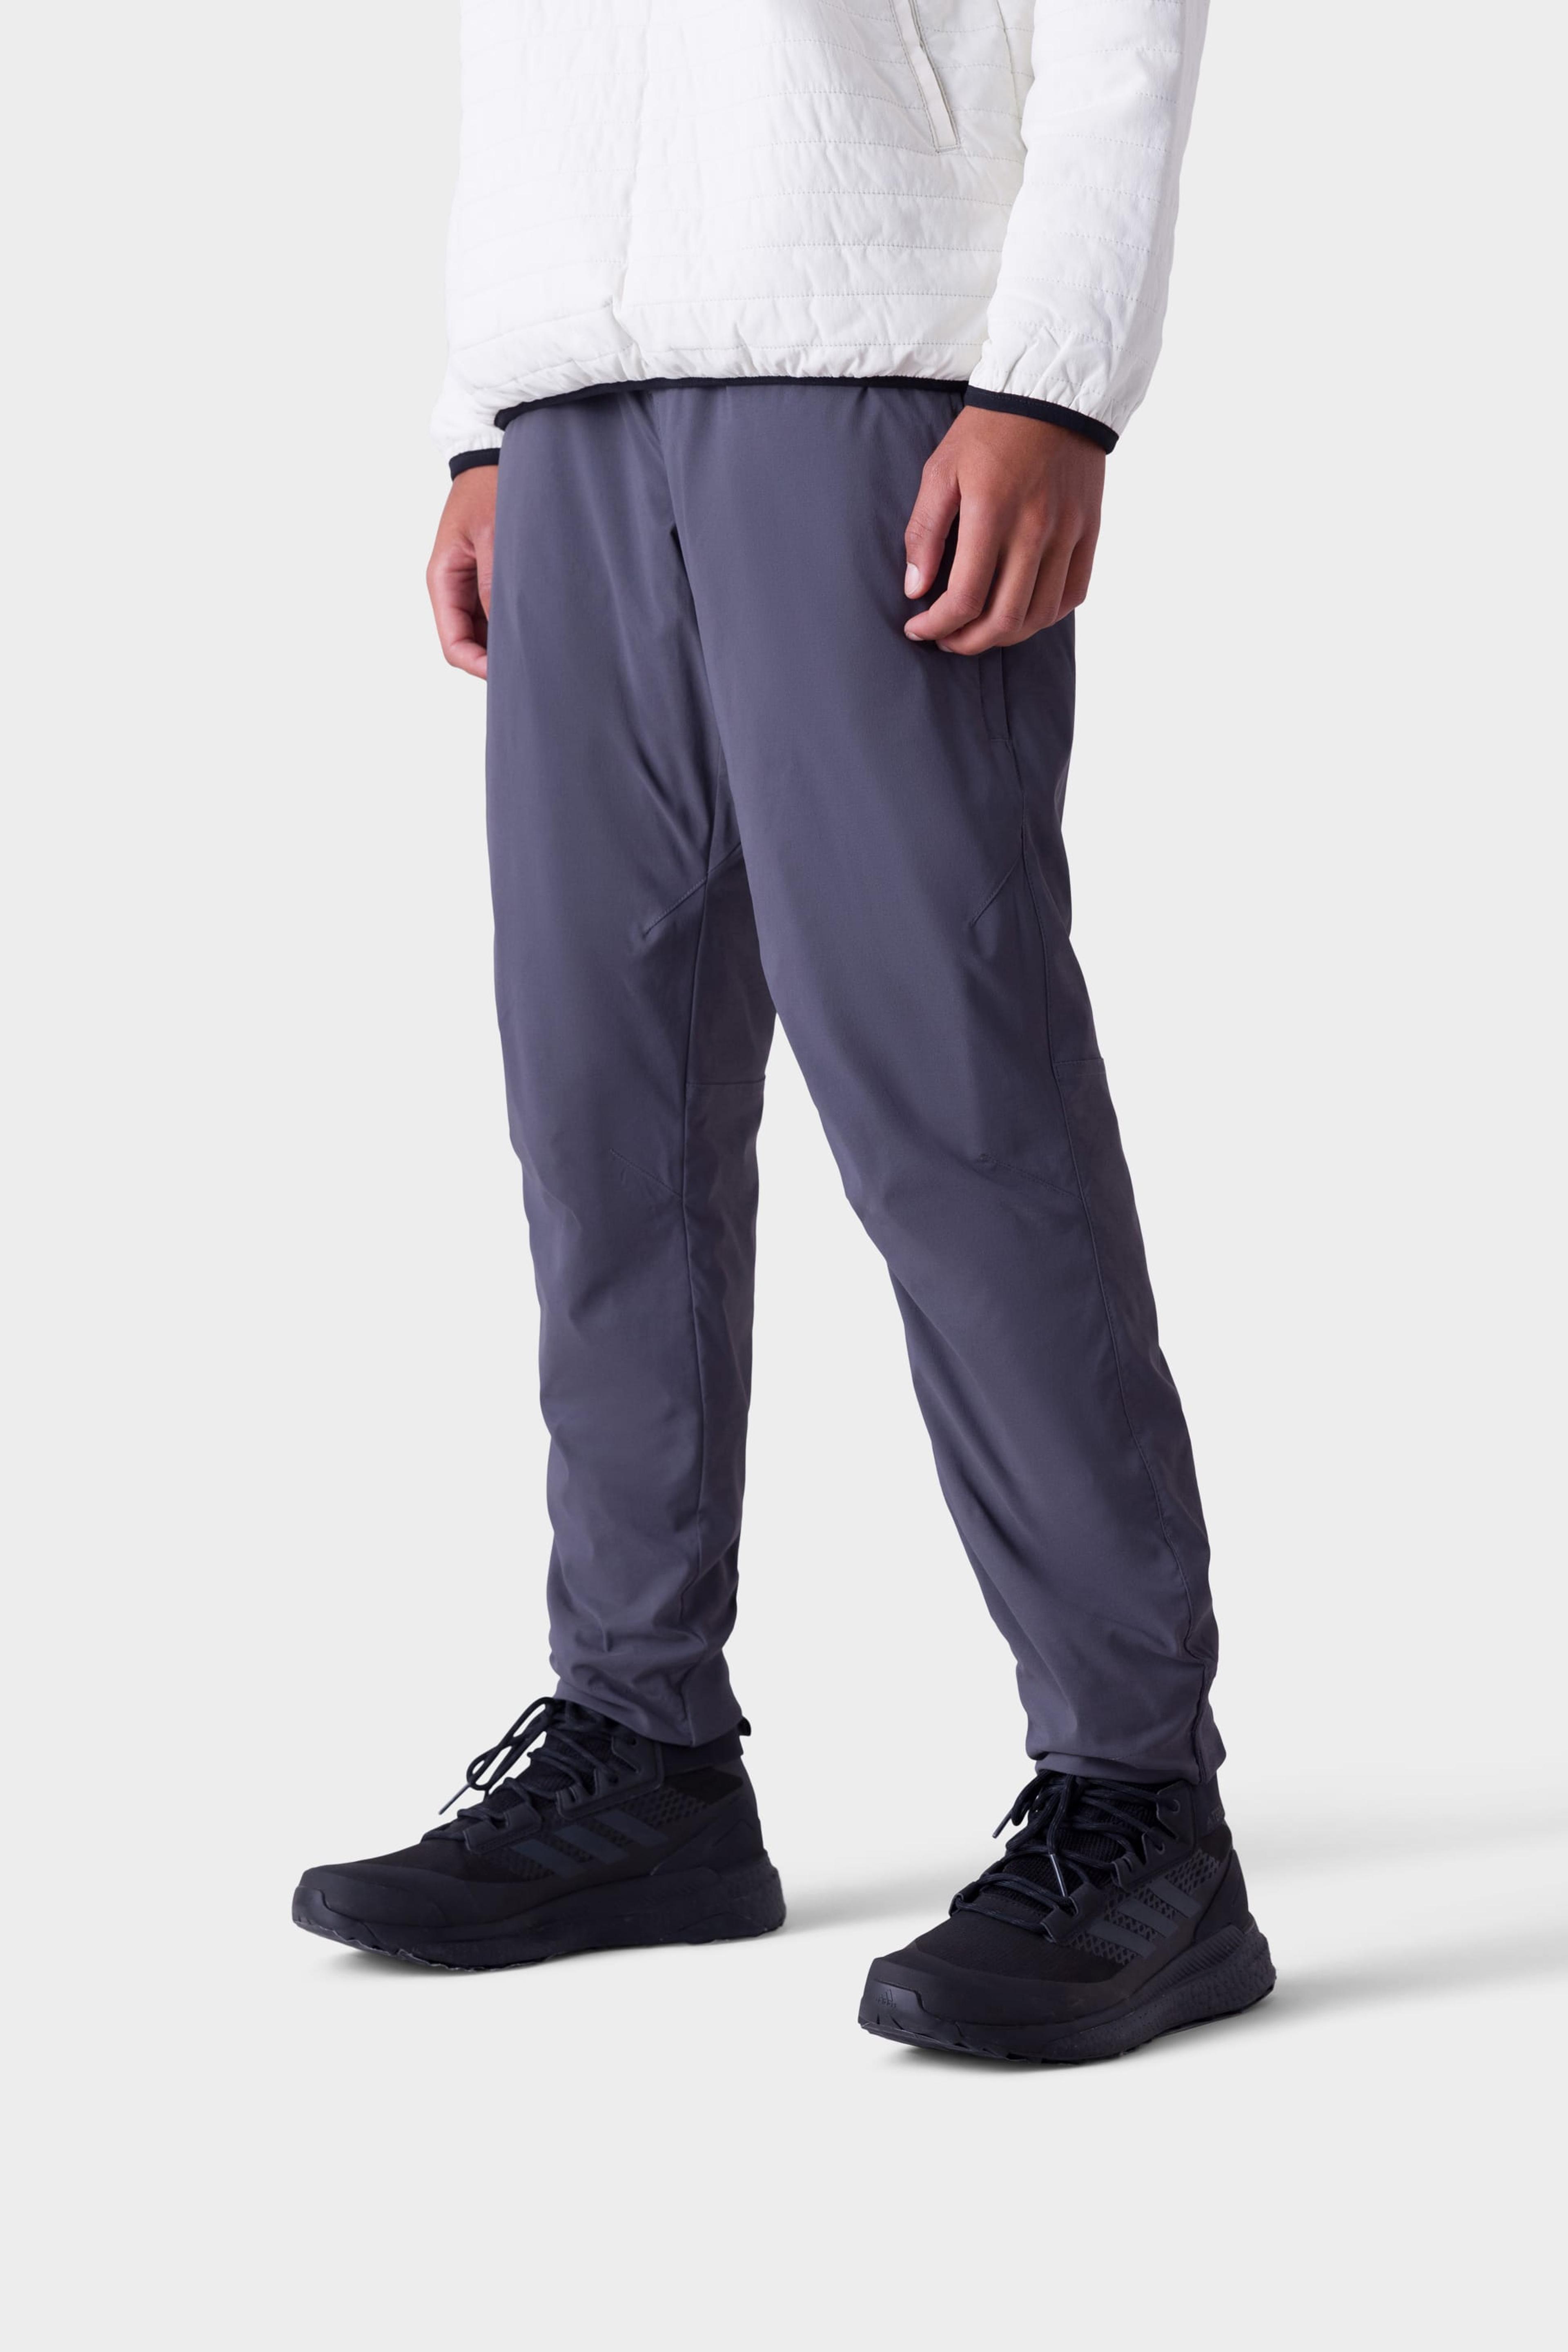 Alternate View 40 of 686 Men's Thermadry Merino-Lined Insulated Pant